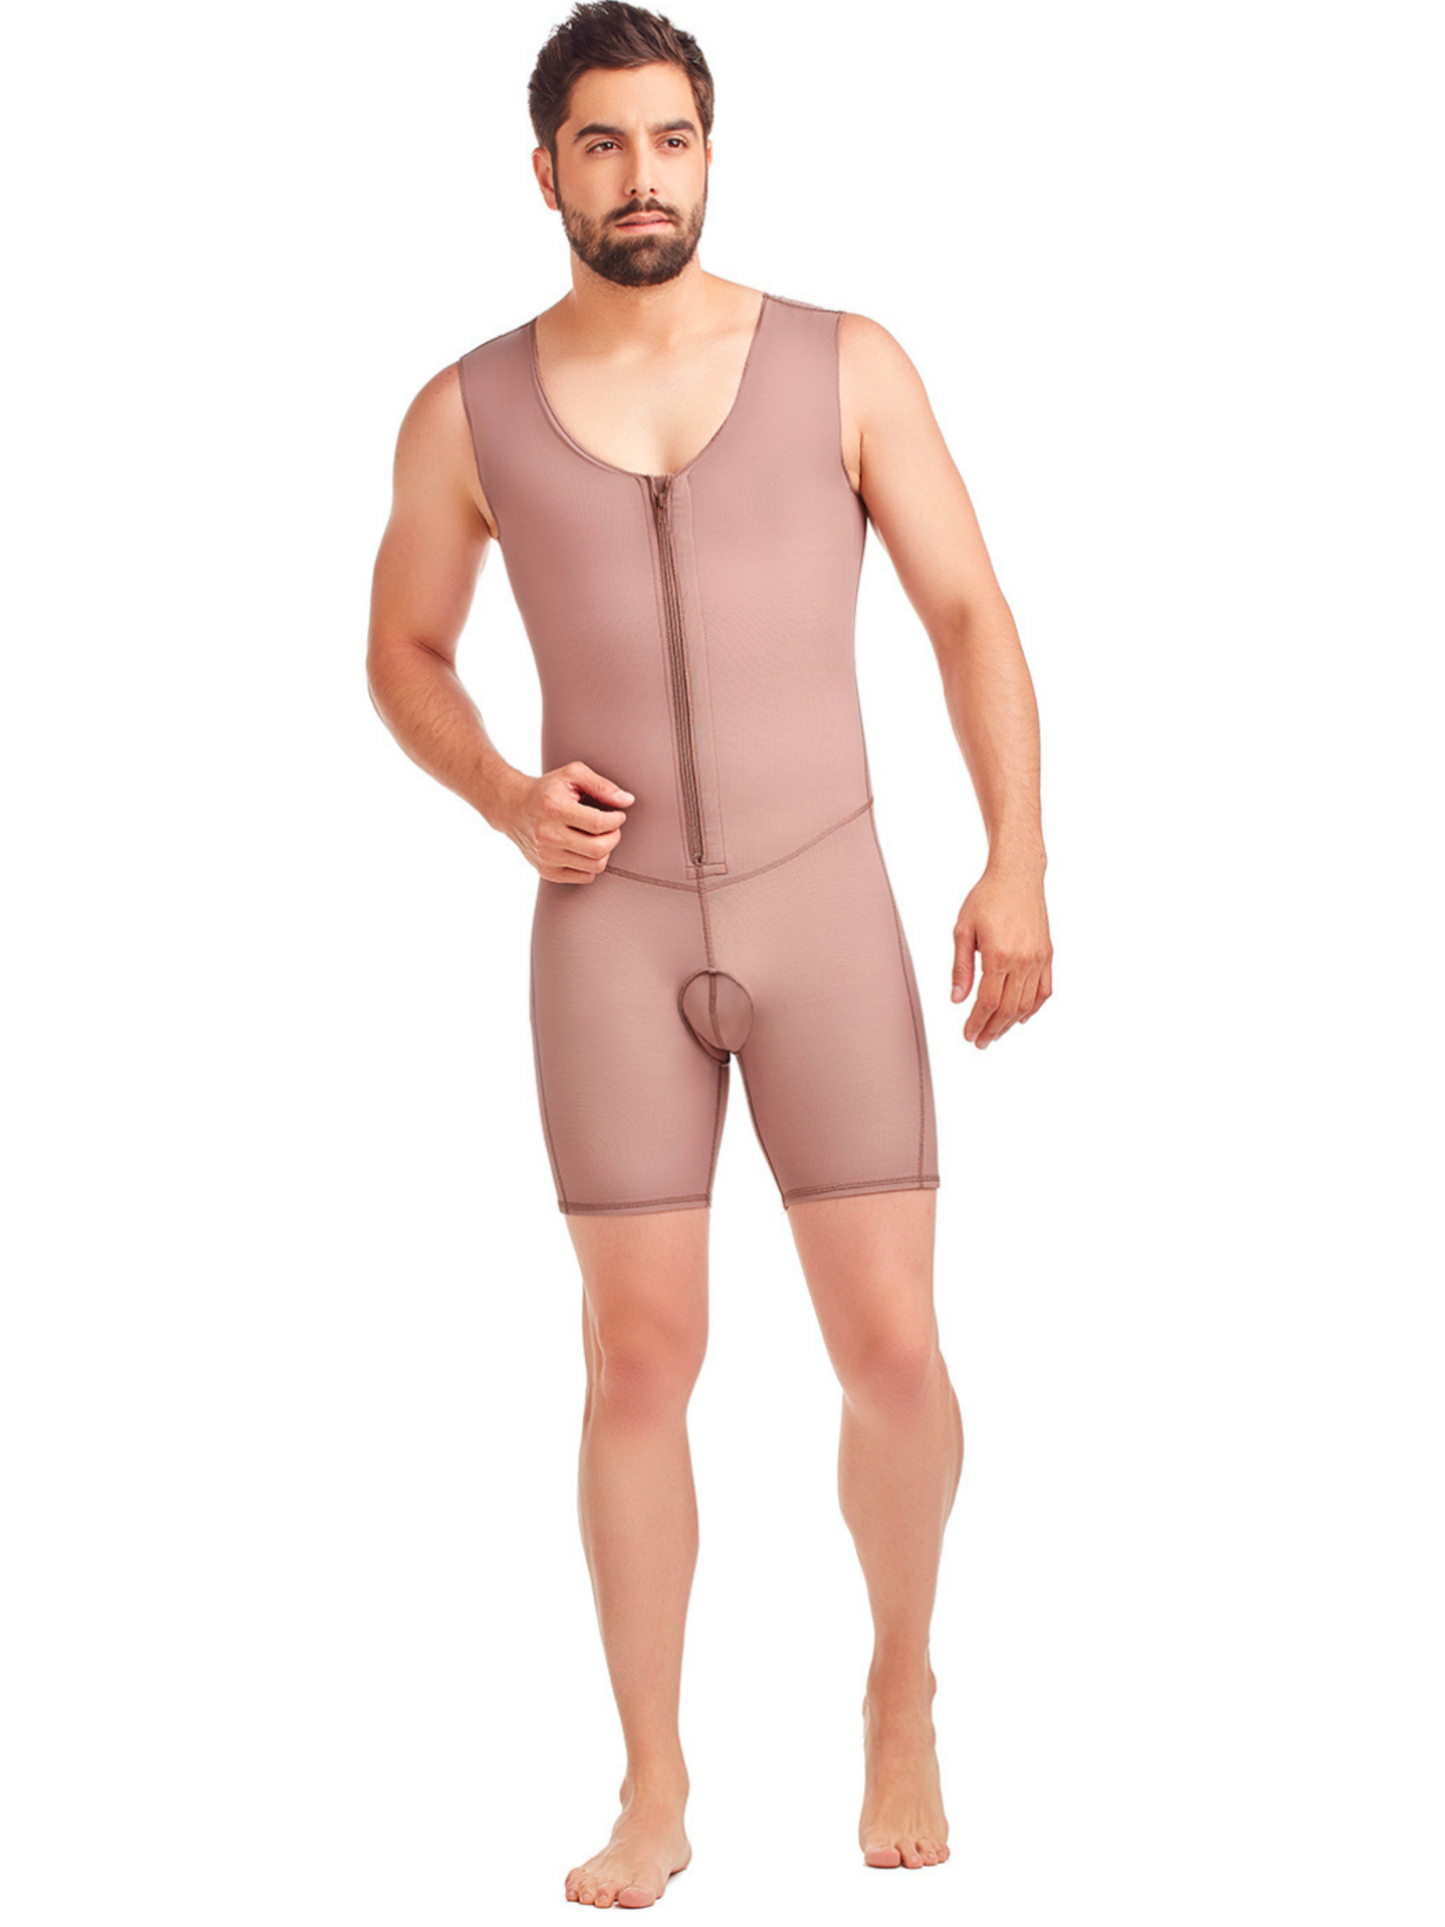 Post-Surgical Posture Improvement Male Girdle : Delie by Fajate Ref 09016